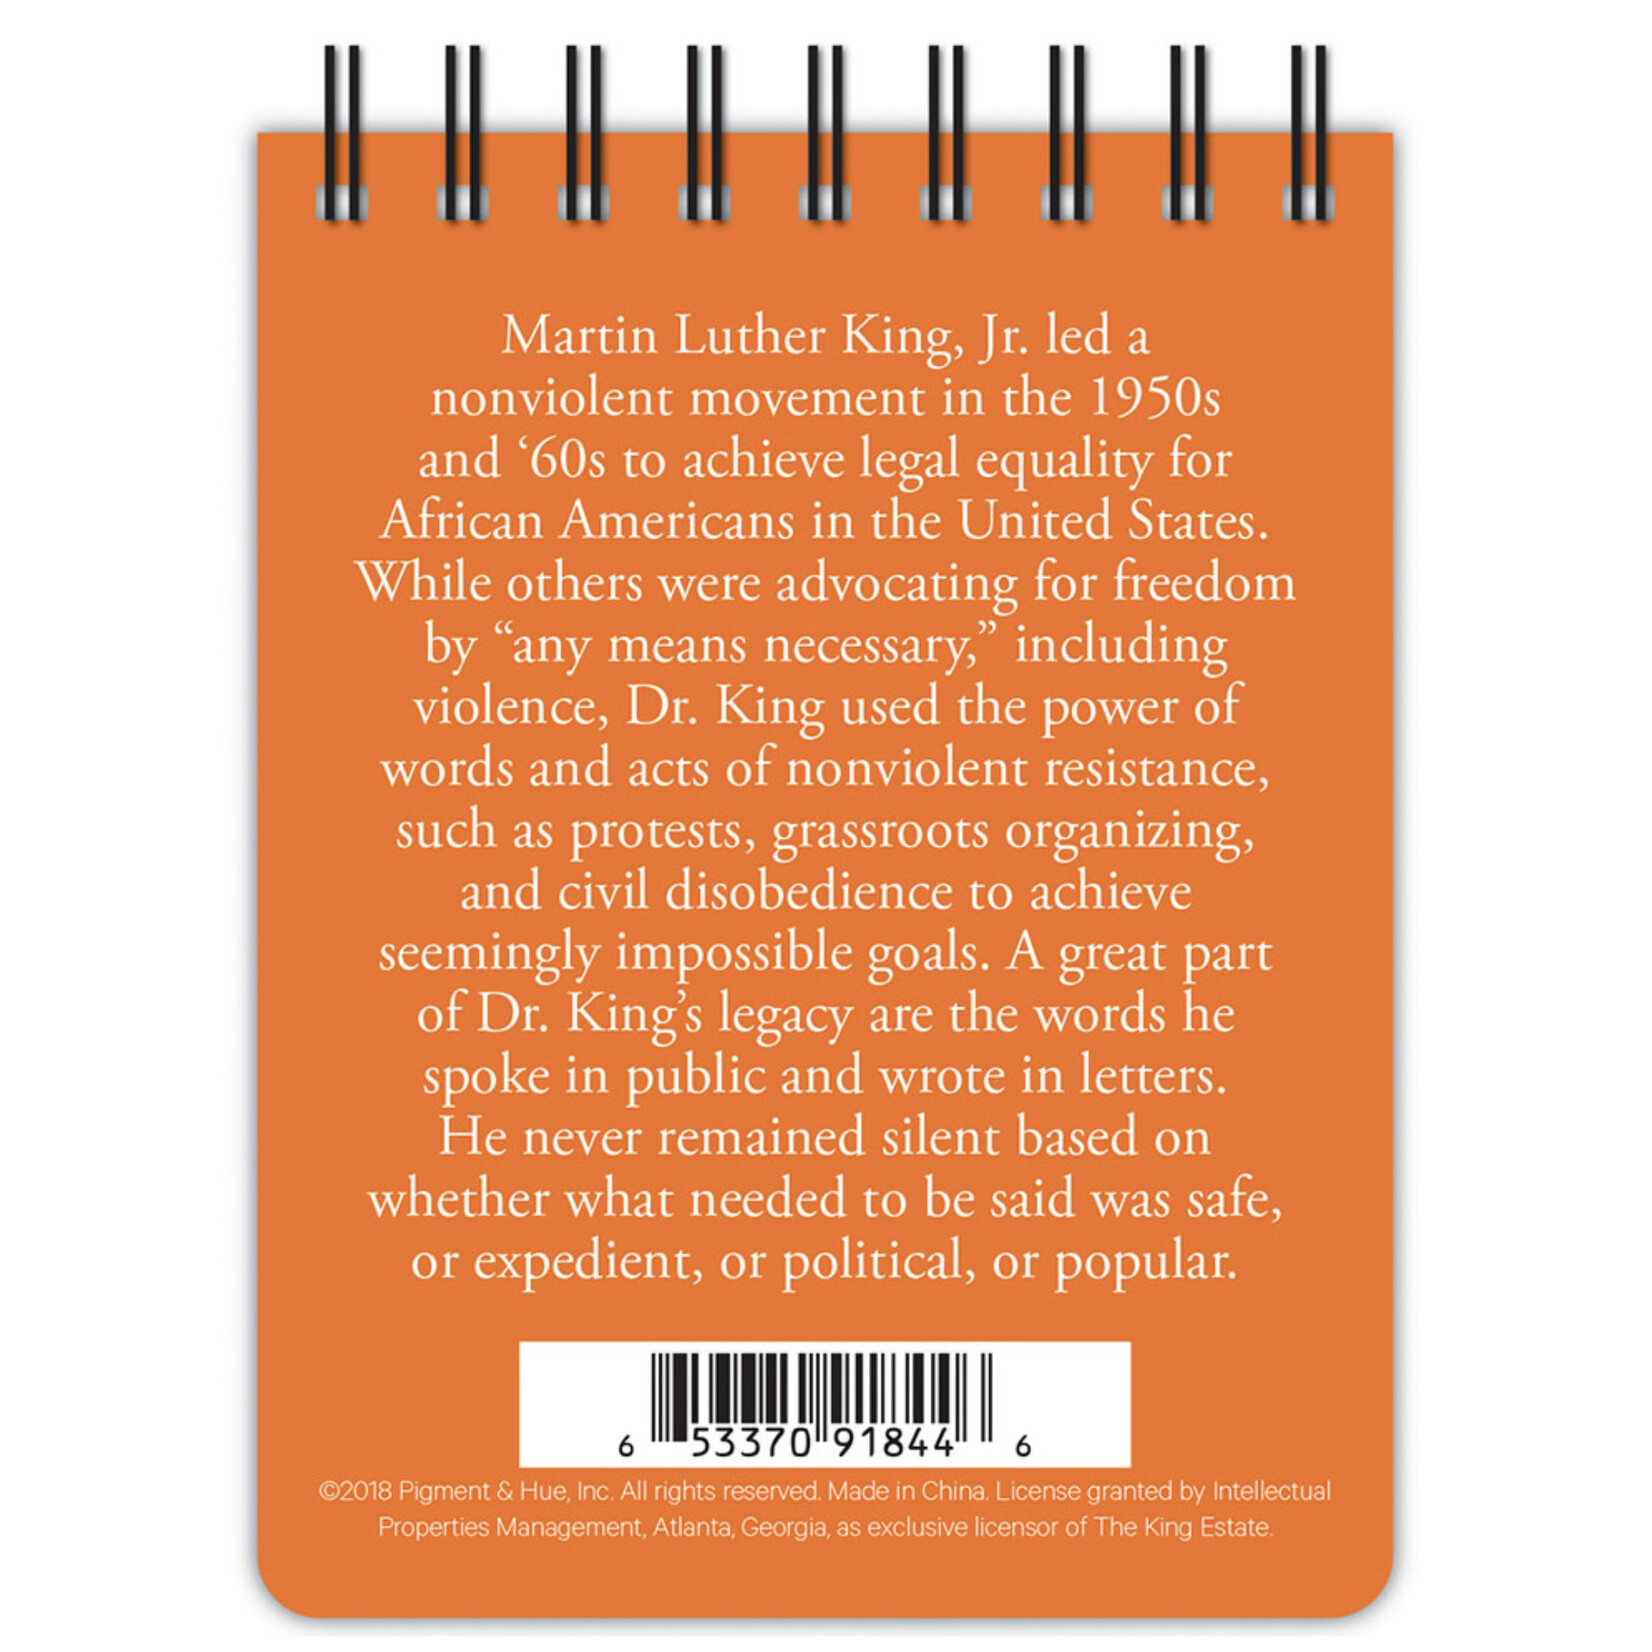 Notebook (Mini) - Injustice Anywhere Is A Threat To Justice Everywhere.. Whatever Affects One Directly Affects All Indirectly - Martin Luther King Jr